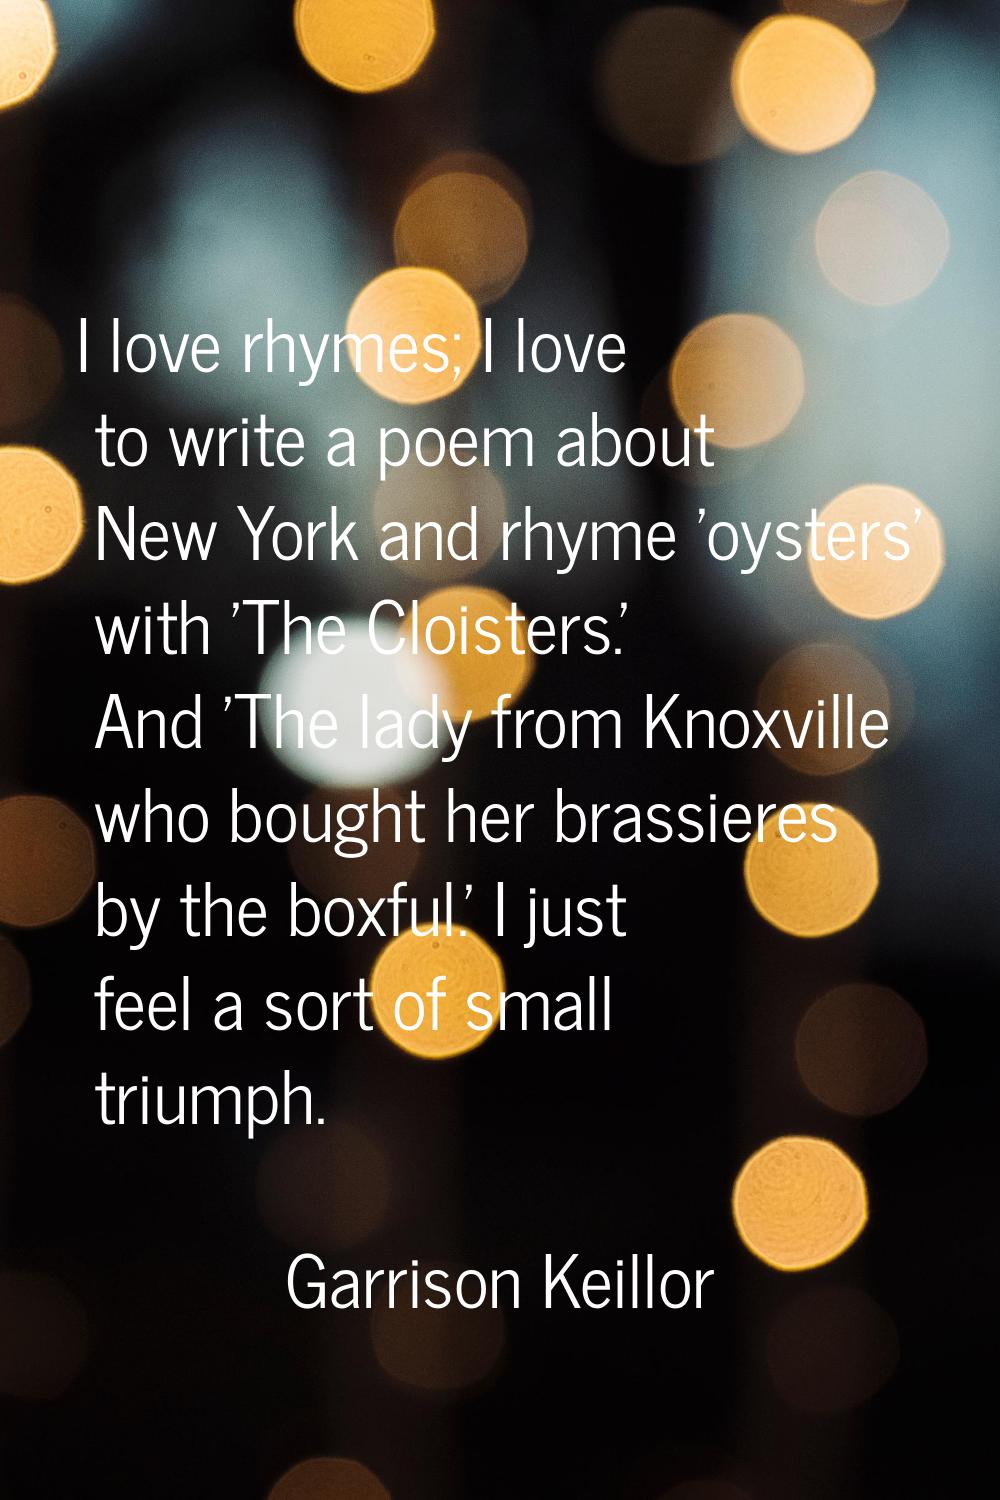 I love rhymes; I love to write a poem about New York and rhyme 'oysters' with 'The Cloisters.' And 